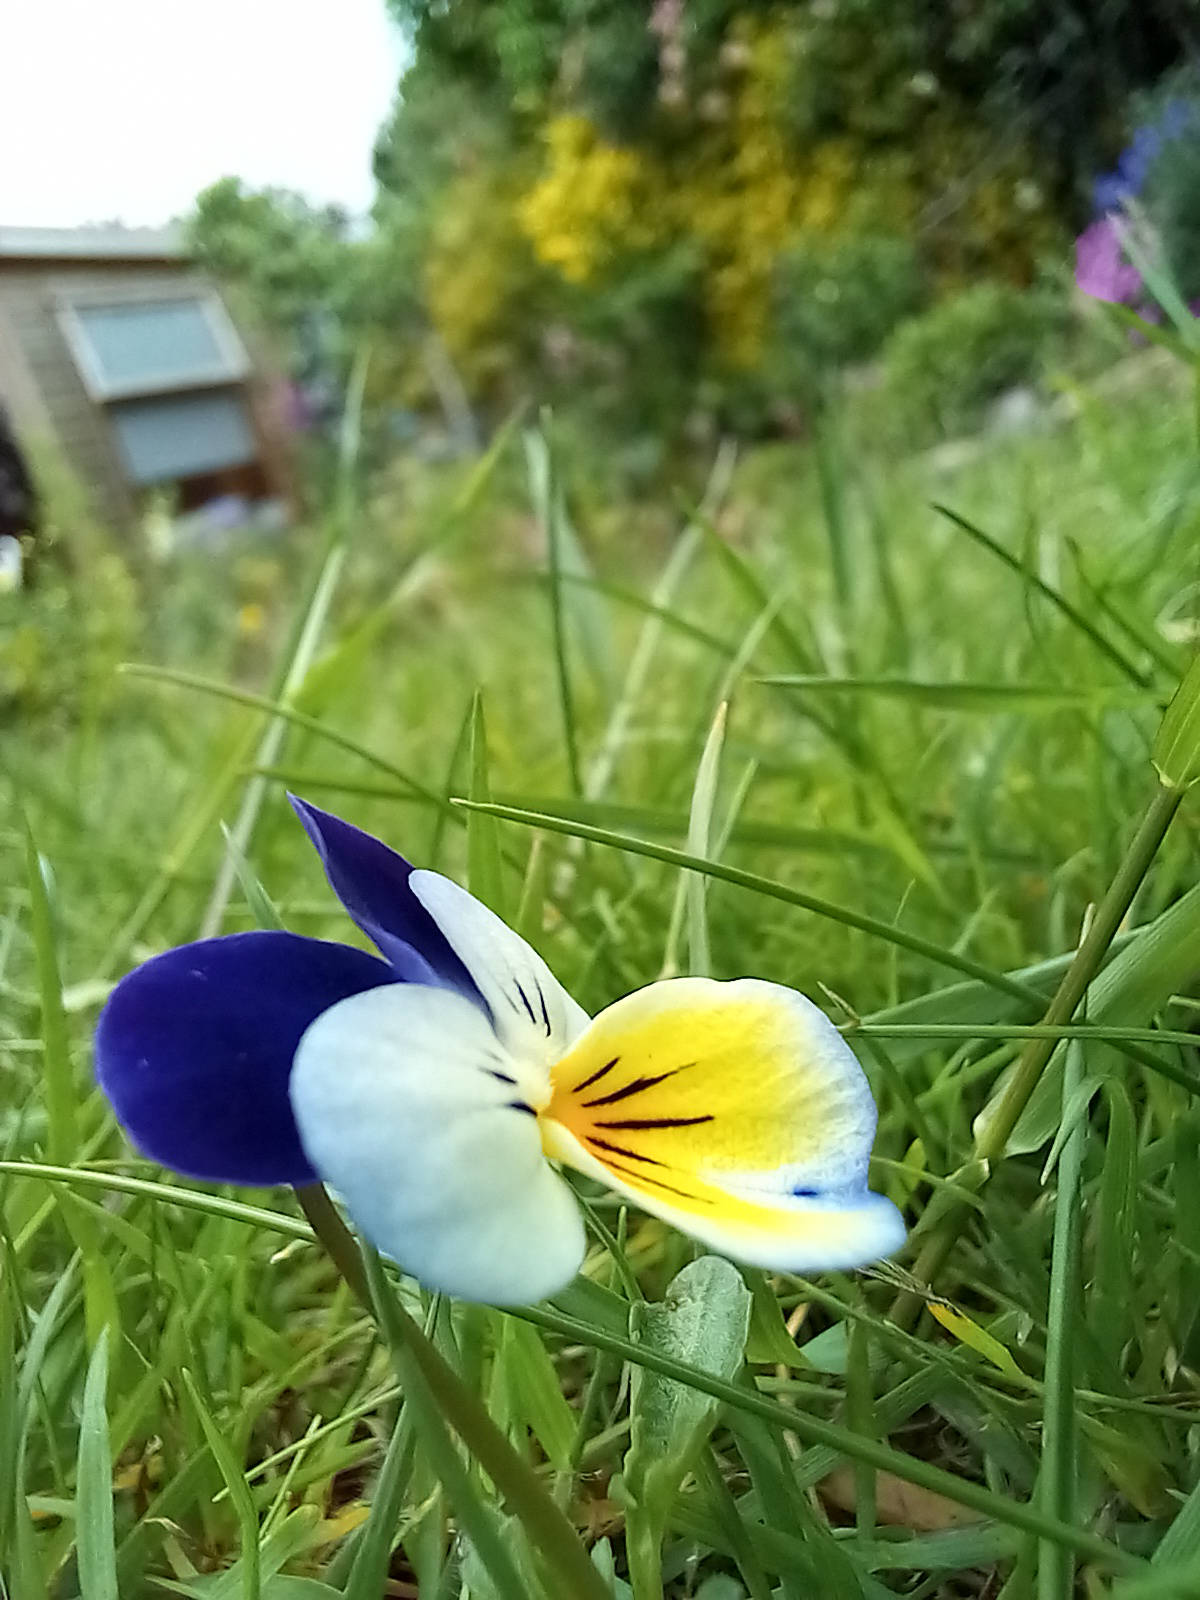 Garden photo of a pansy flower in grass